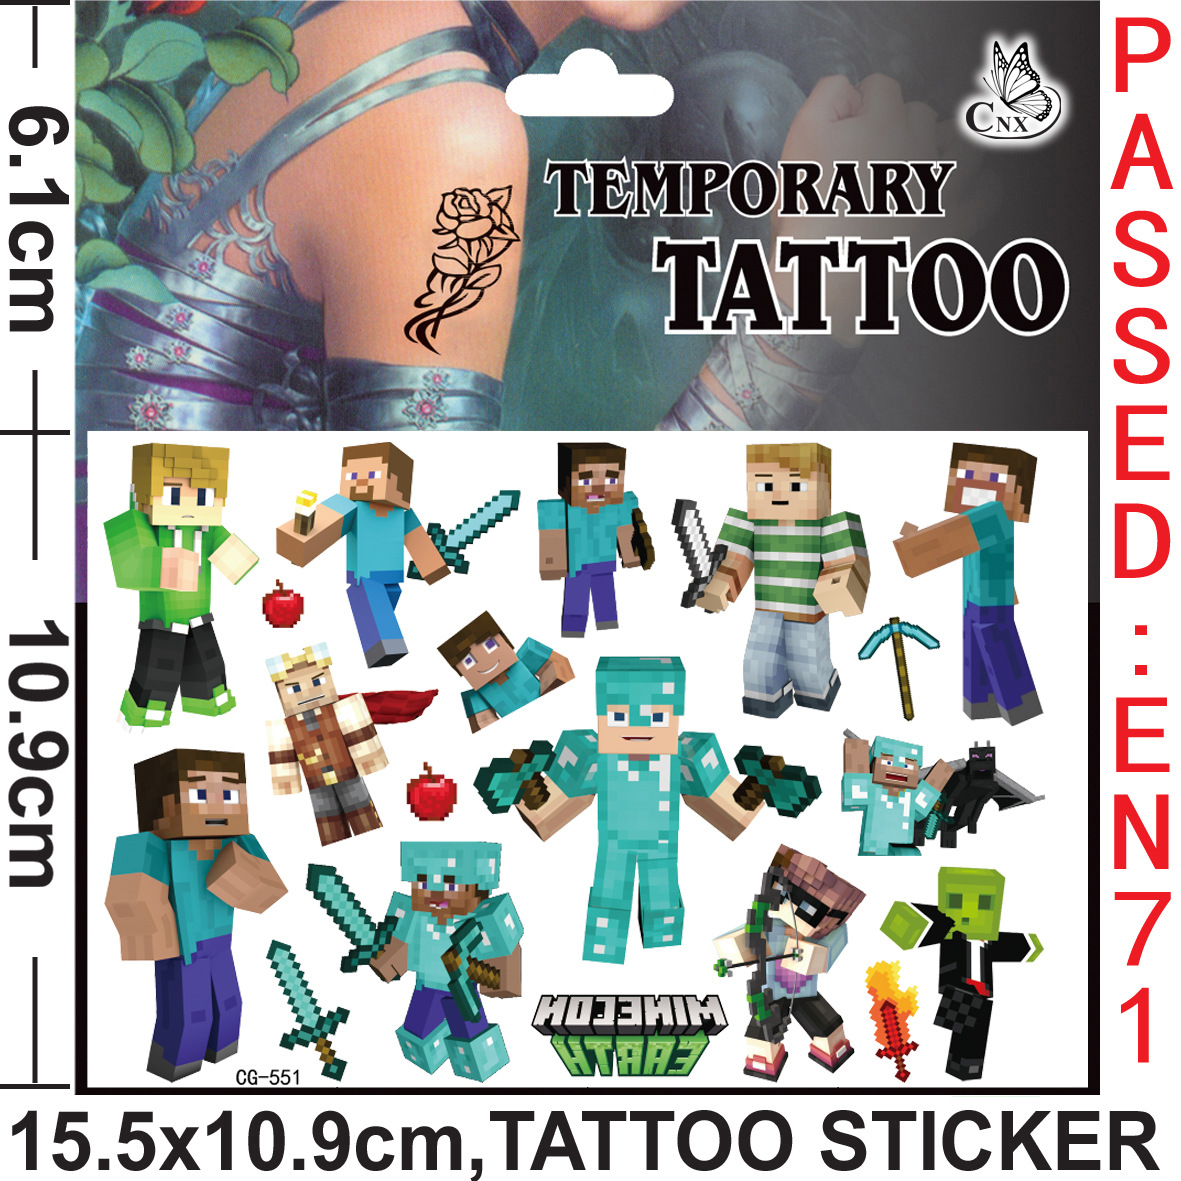 Share more than 178 minecraft temporary tattoos best